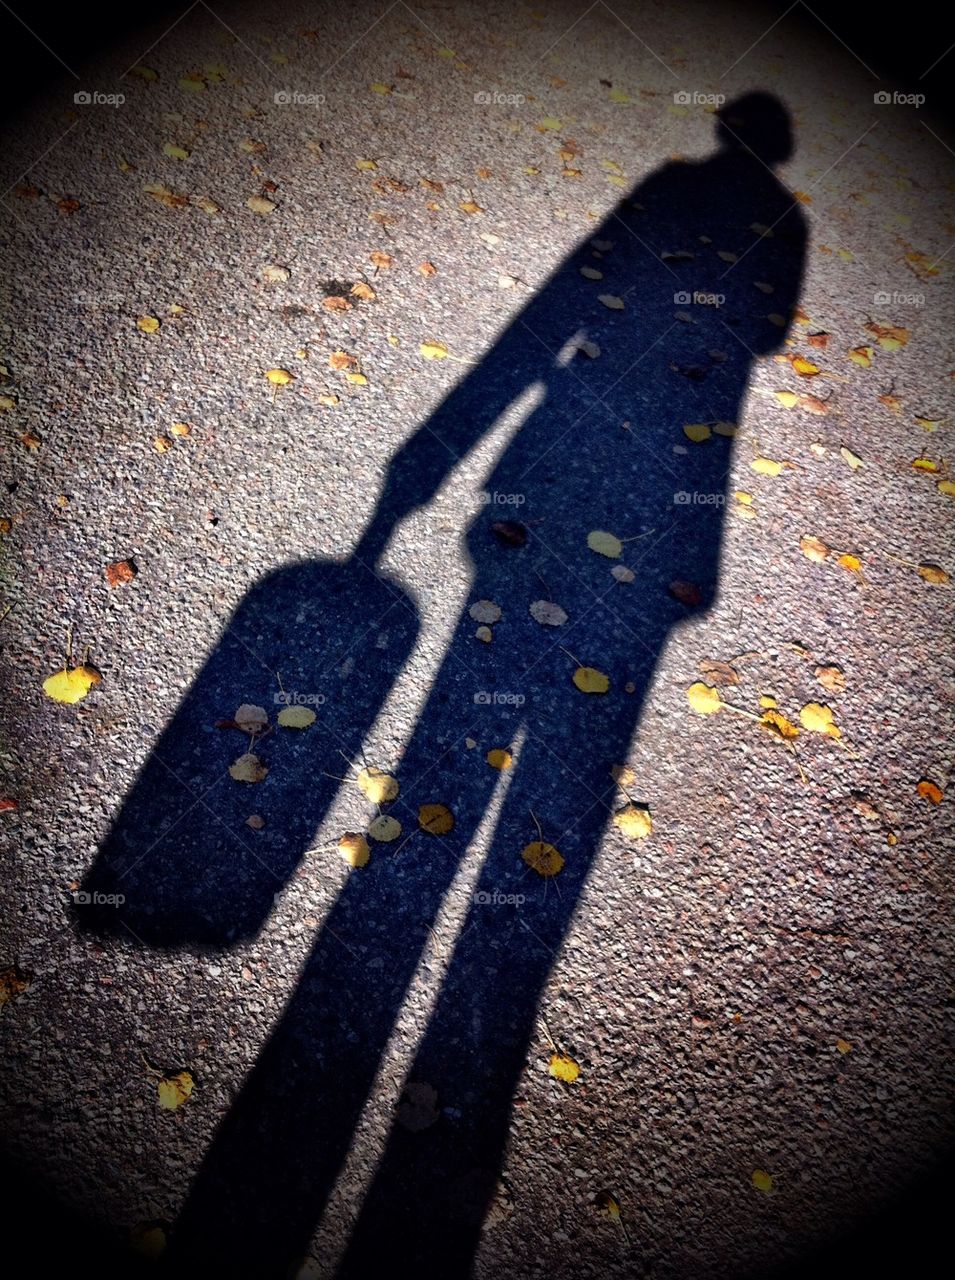 Shadow picture of women with bag.